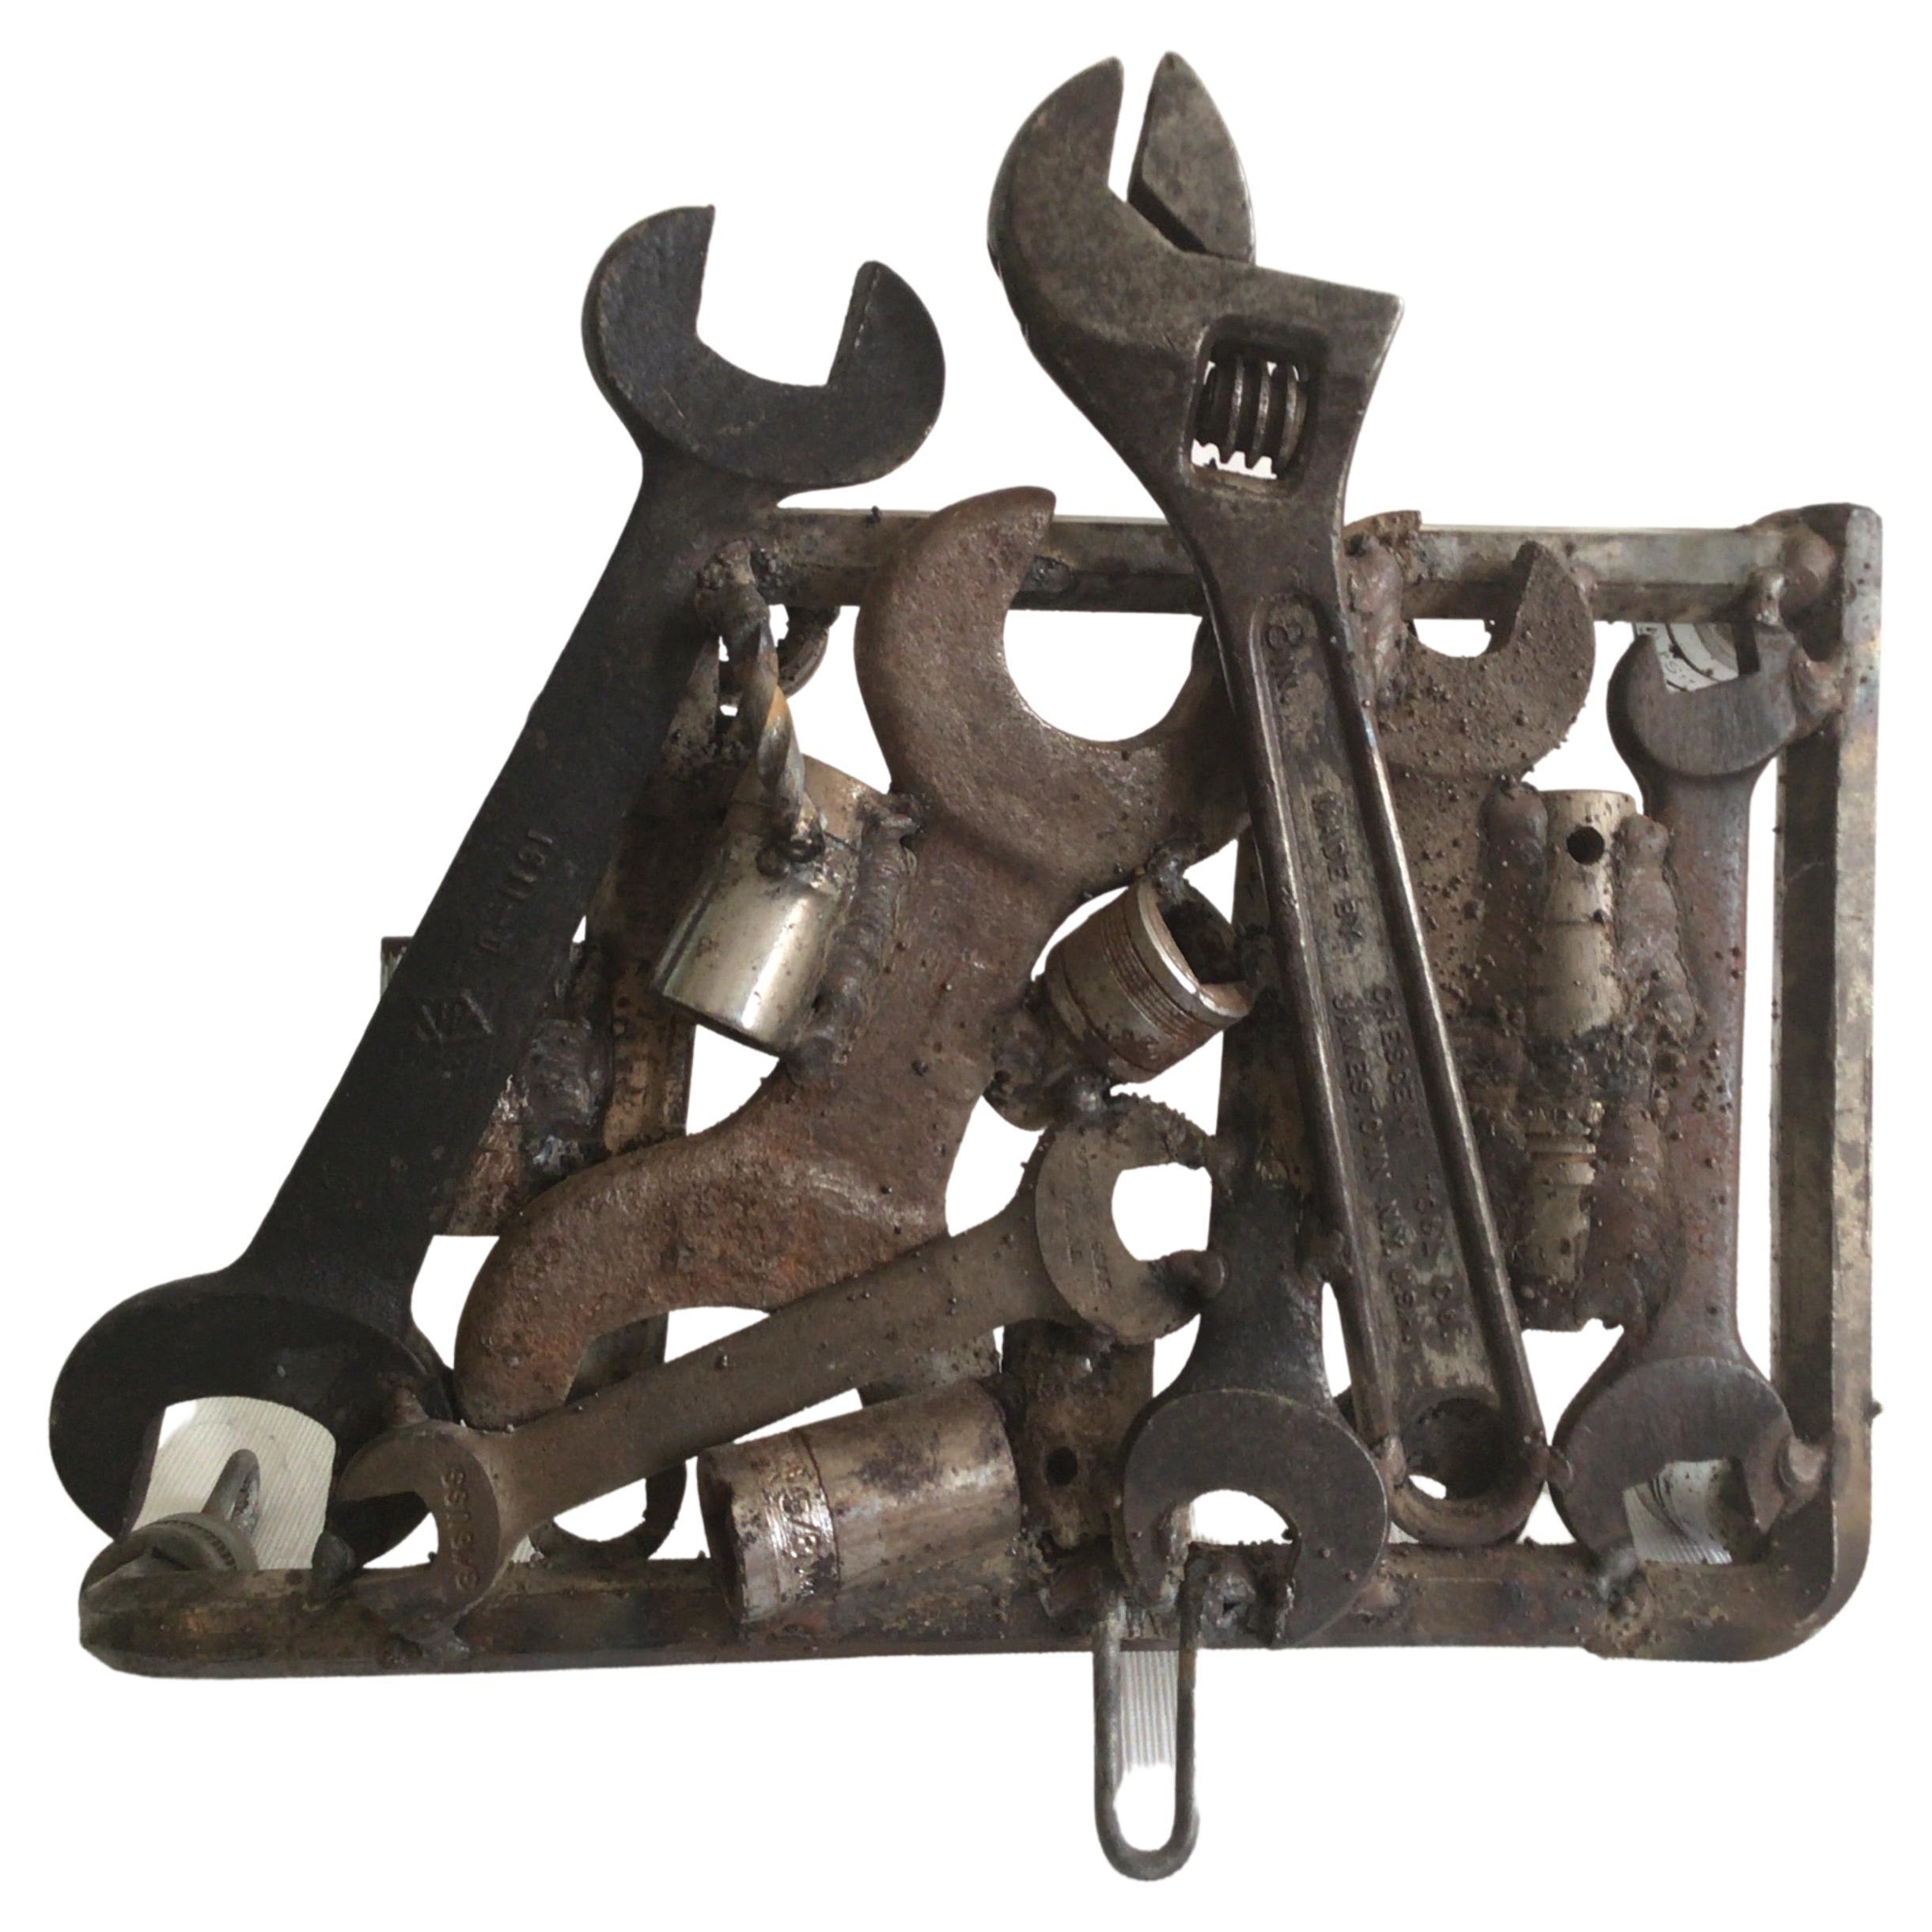 1970s Industrial Wrench Sculpture For Sale